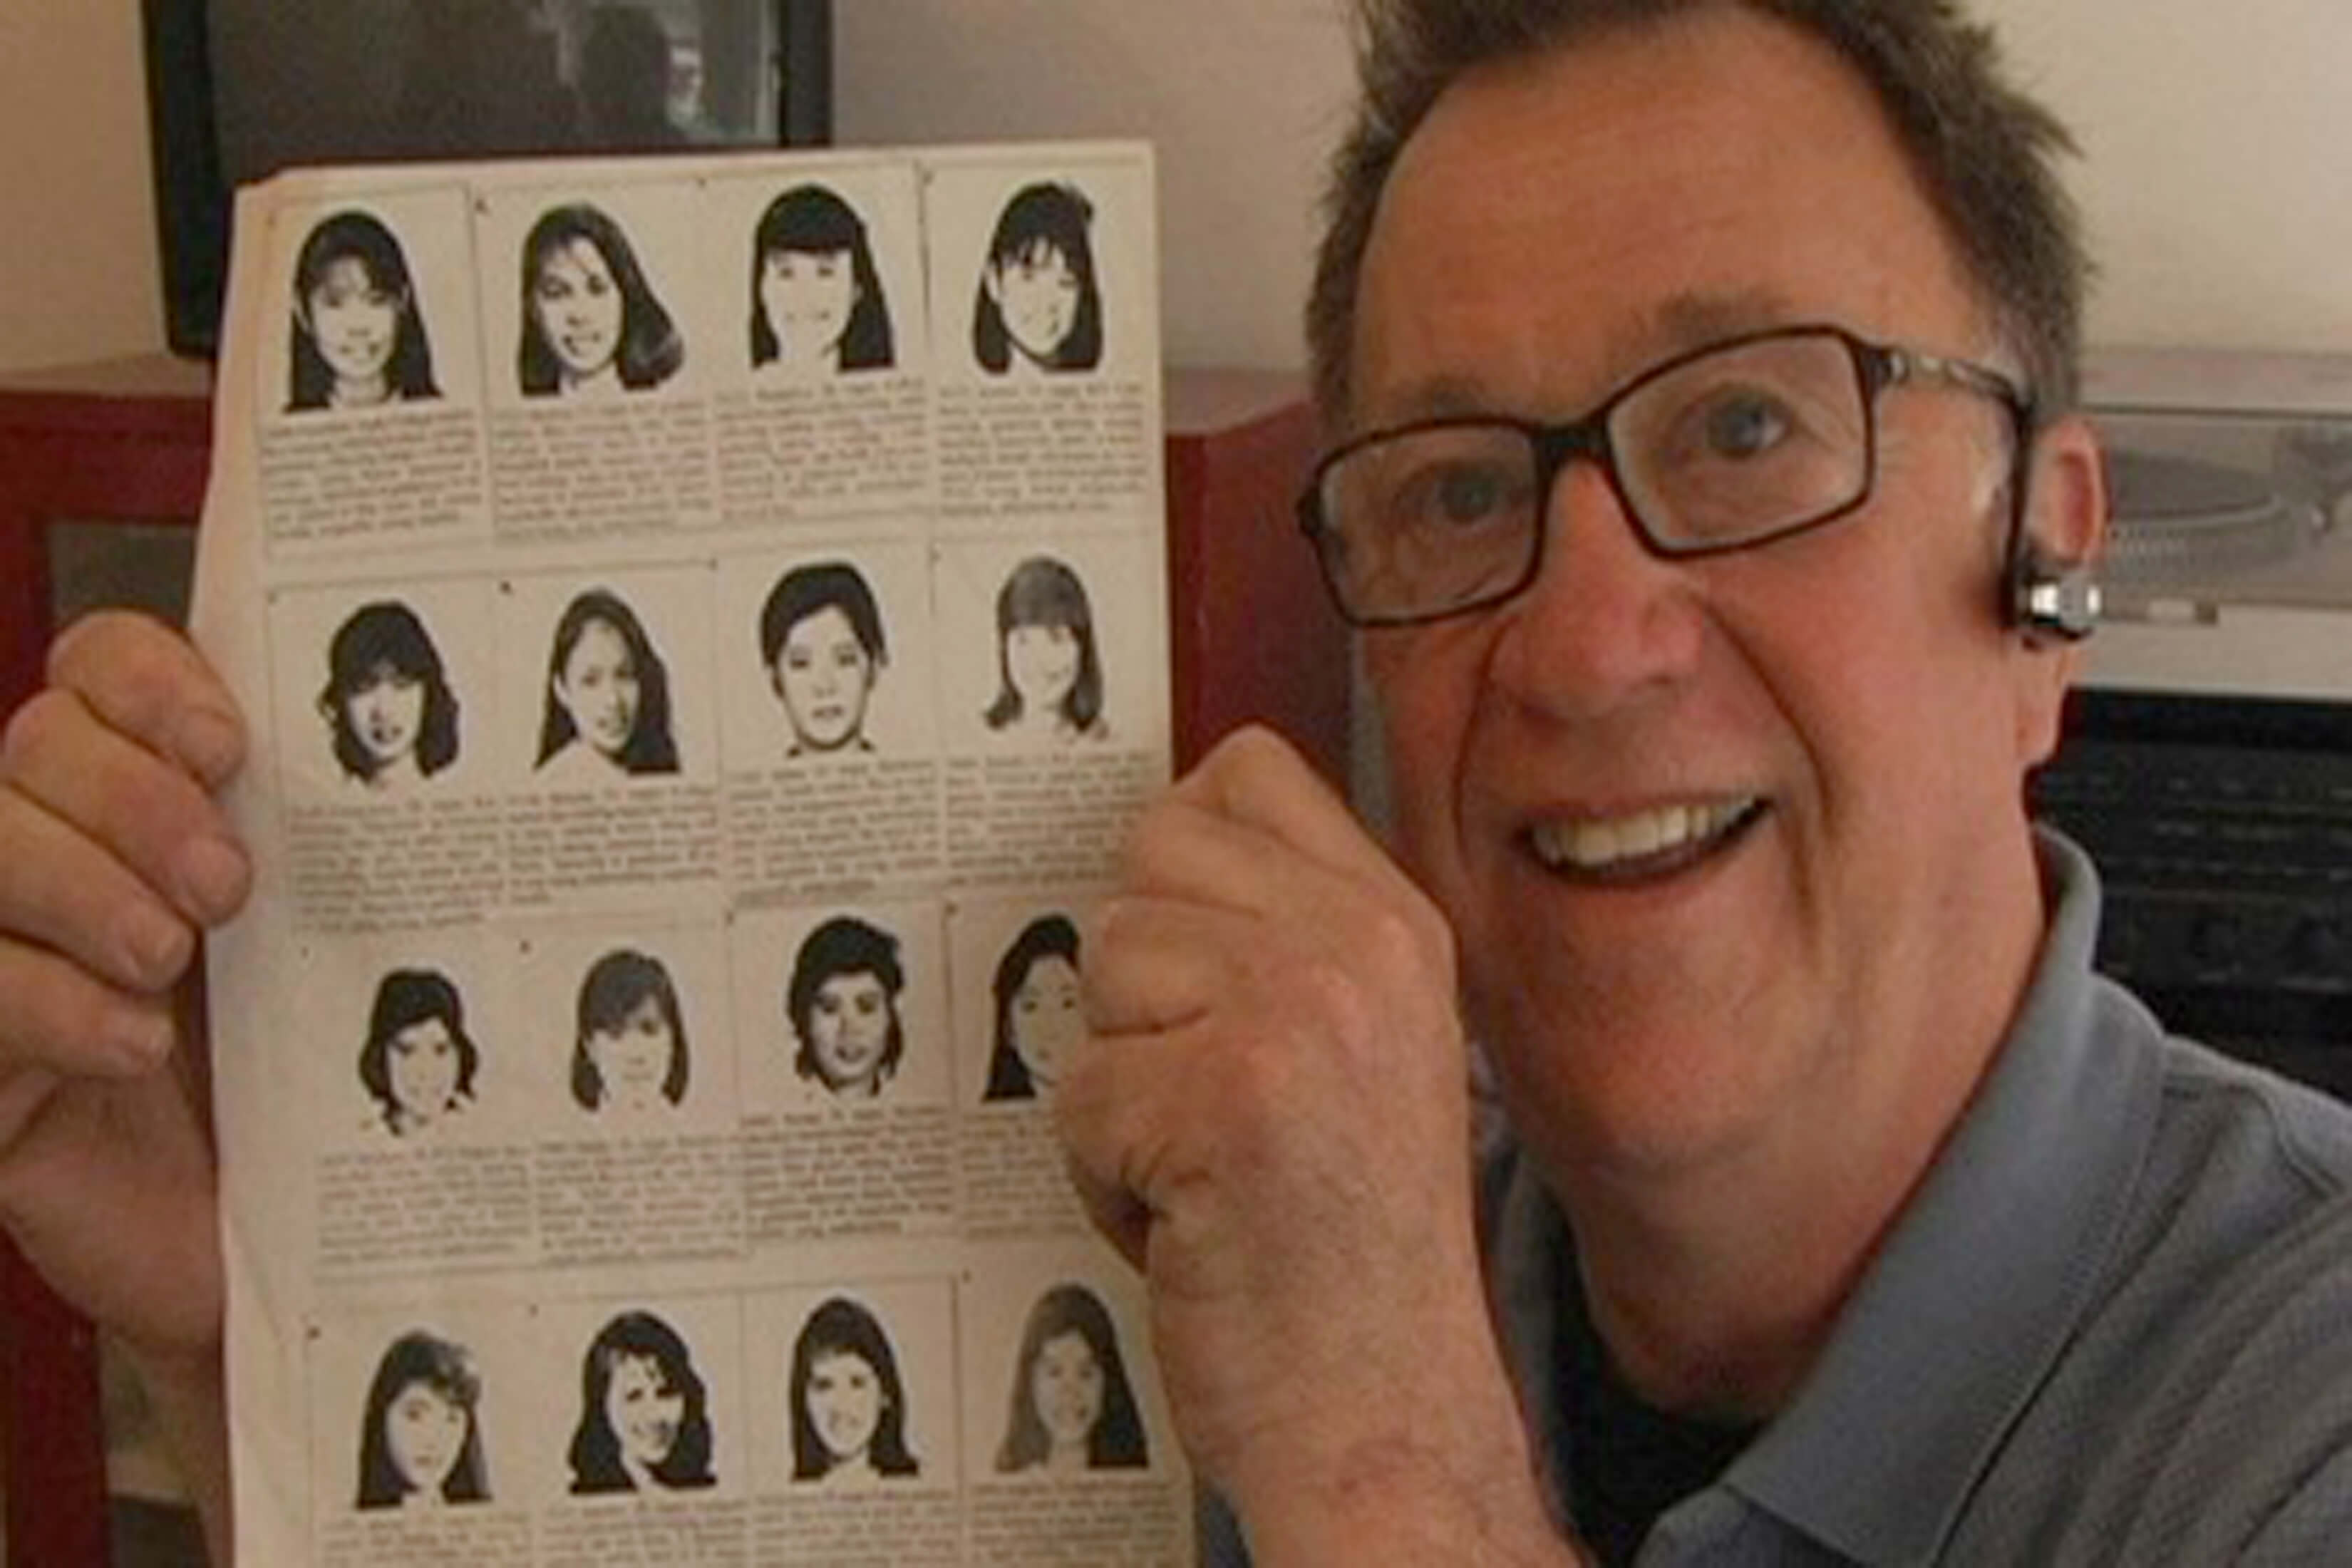 A smiling man holds a paper with both of his hands. The paper has the faces of Chinese women with descriptions below each photo. He wears eyeglasses and a headset.